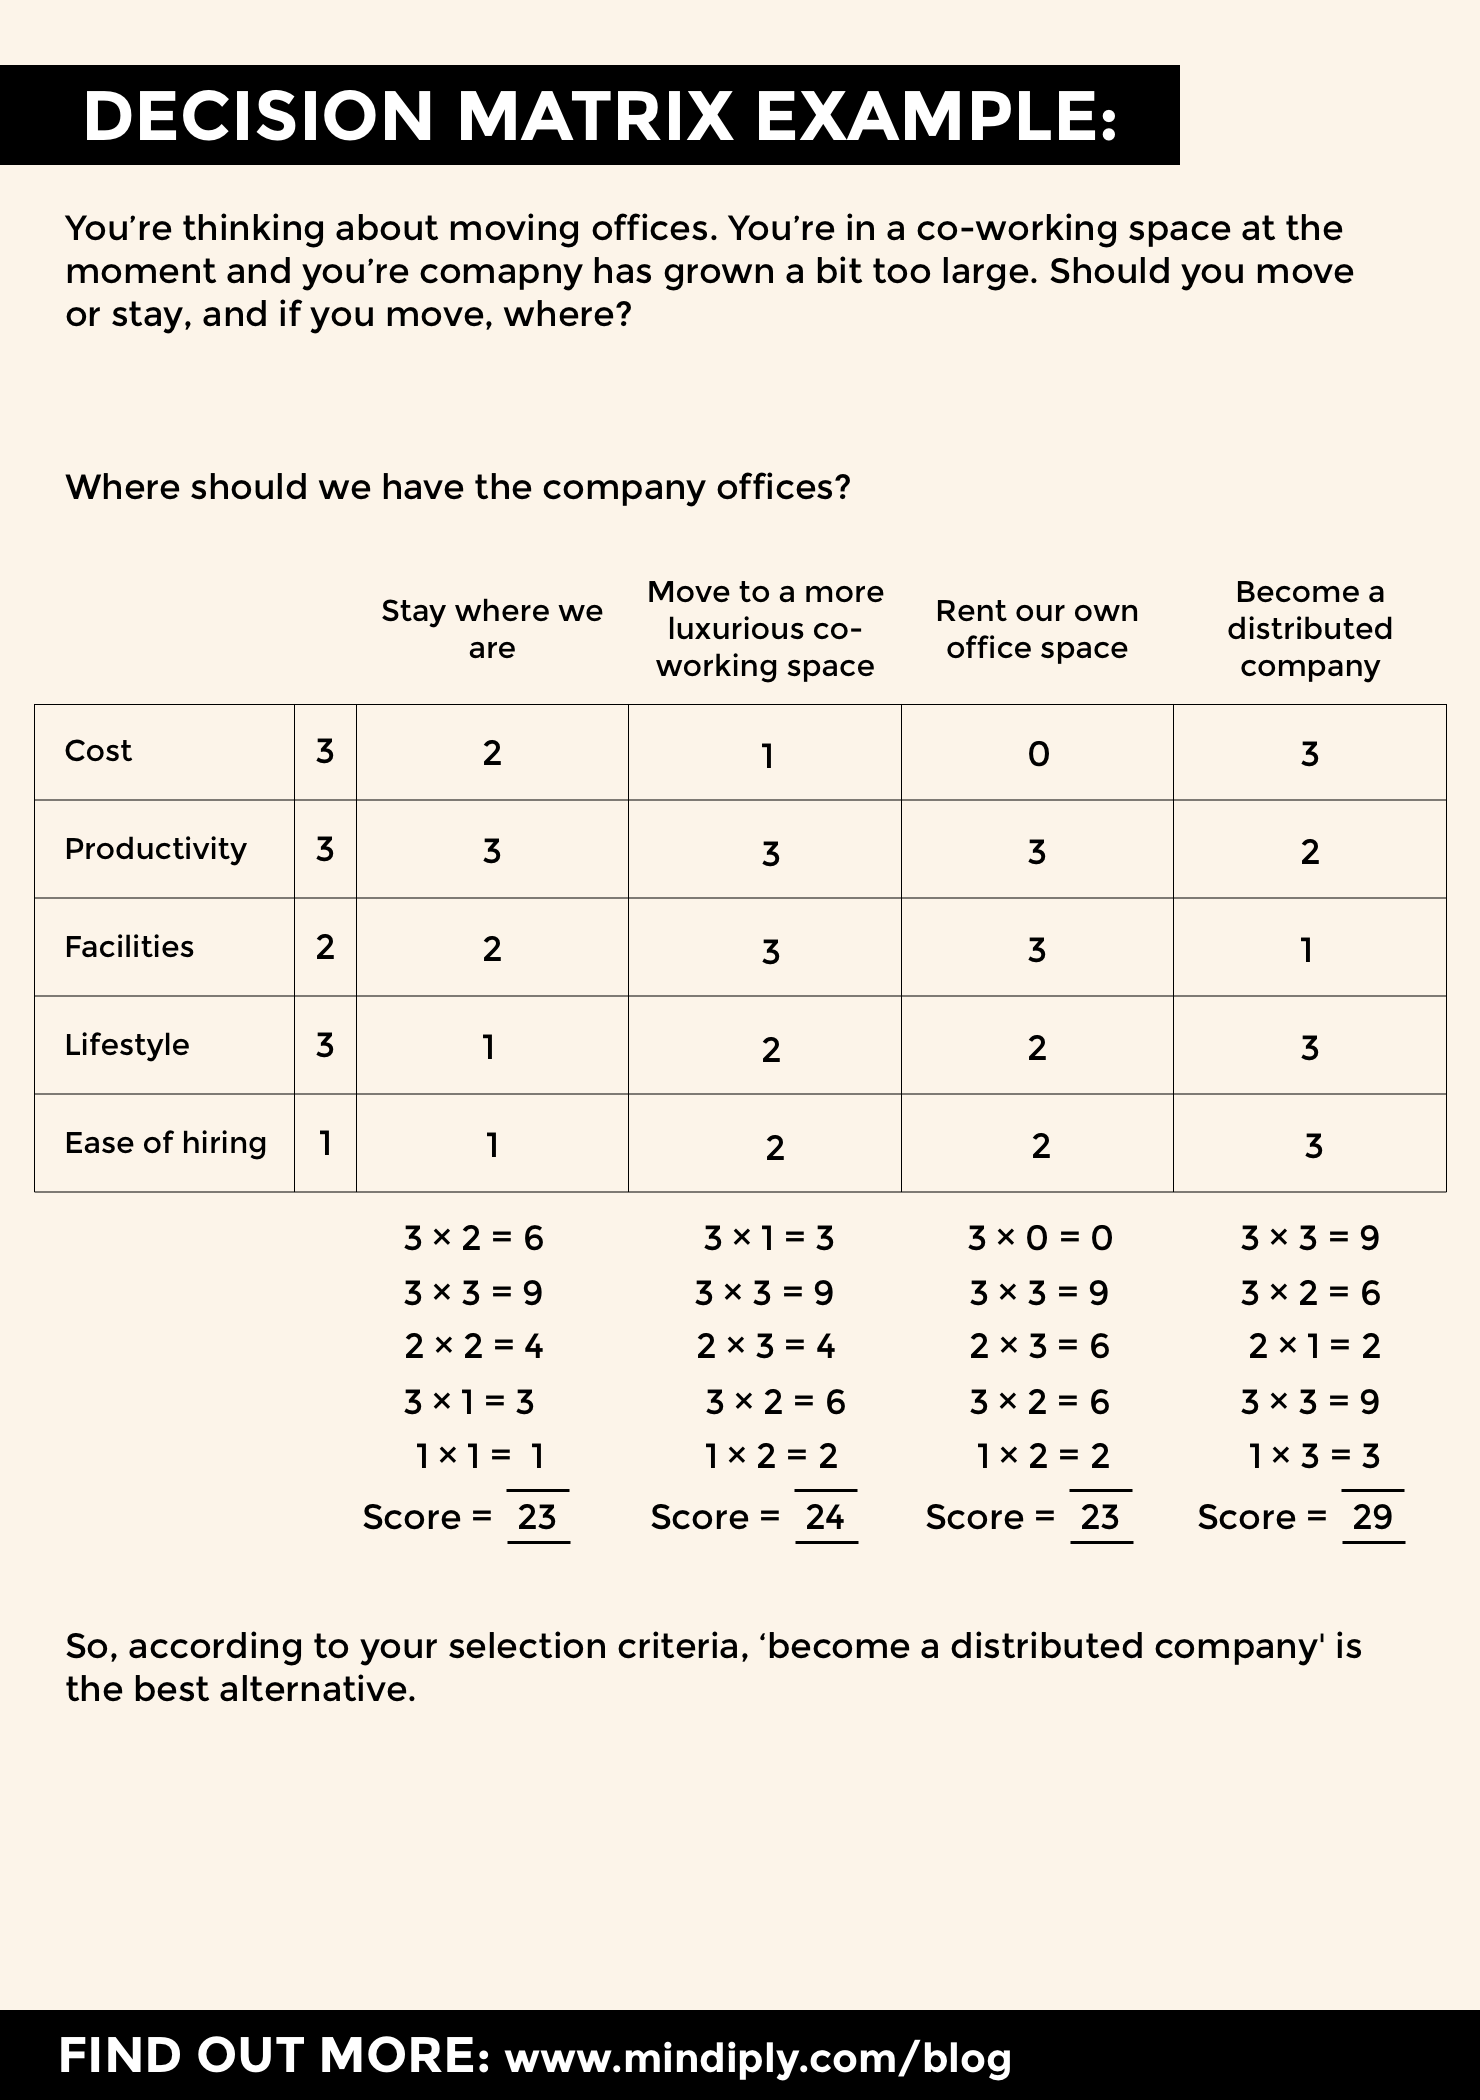 Decision making technique reference card - decision matrix example